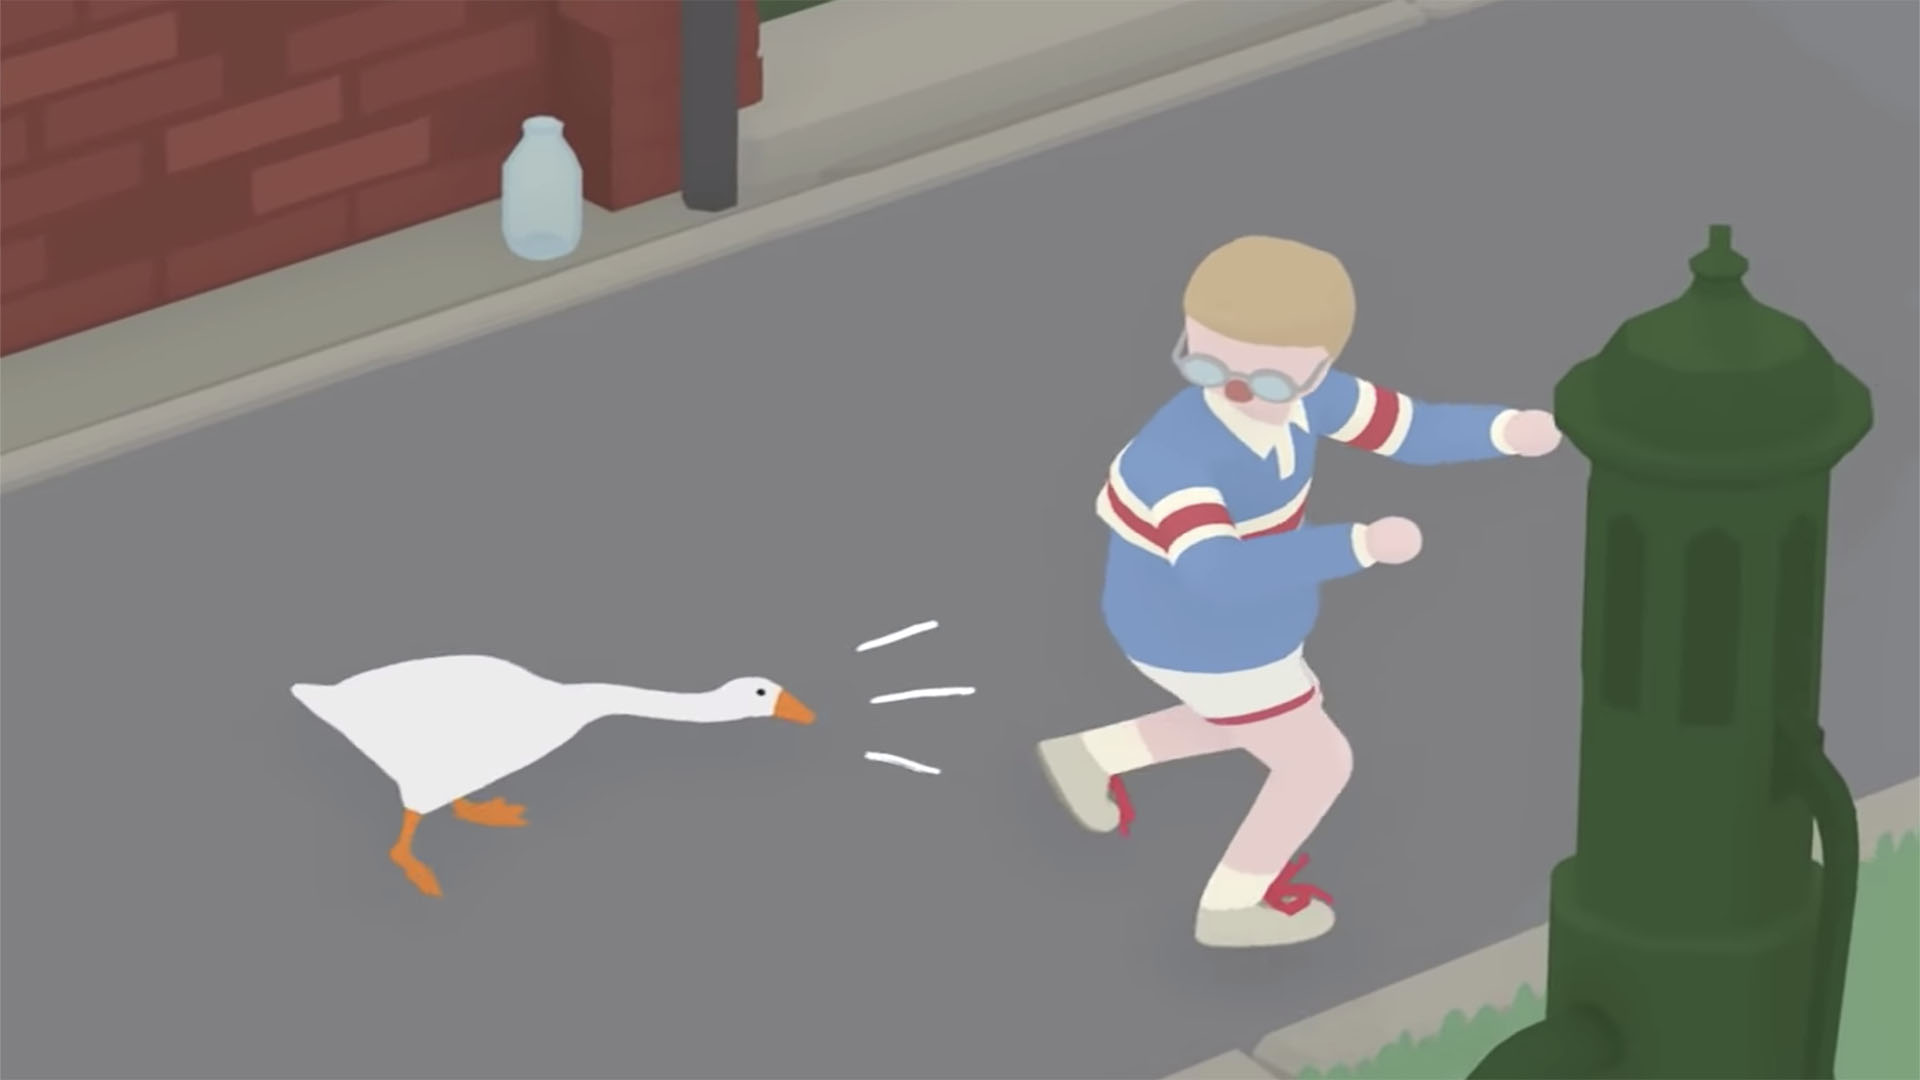 Untitled Goose Game Review 